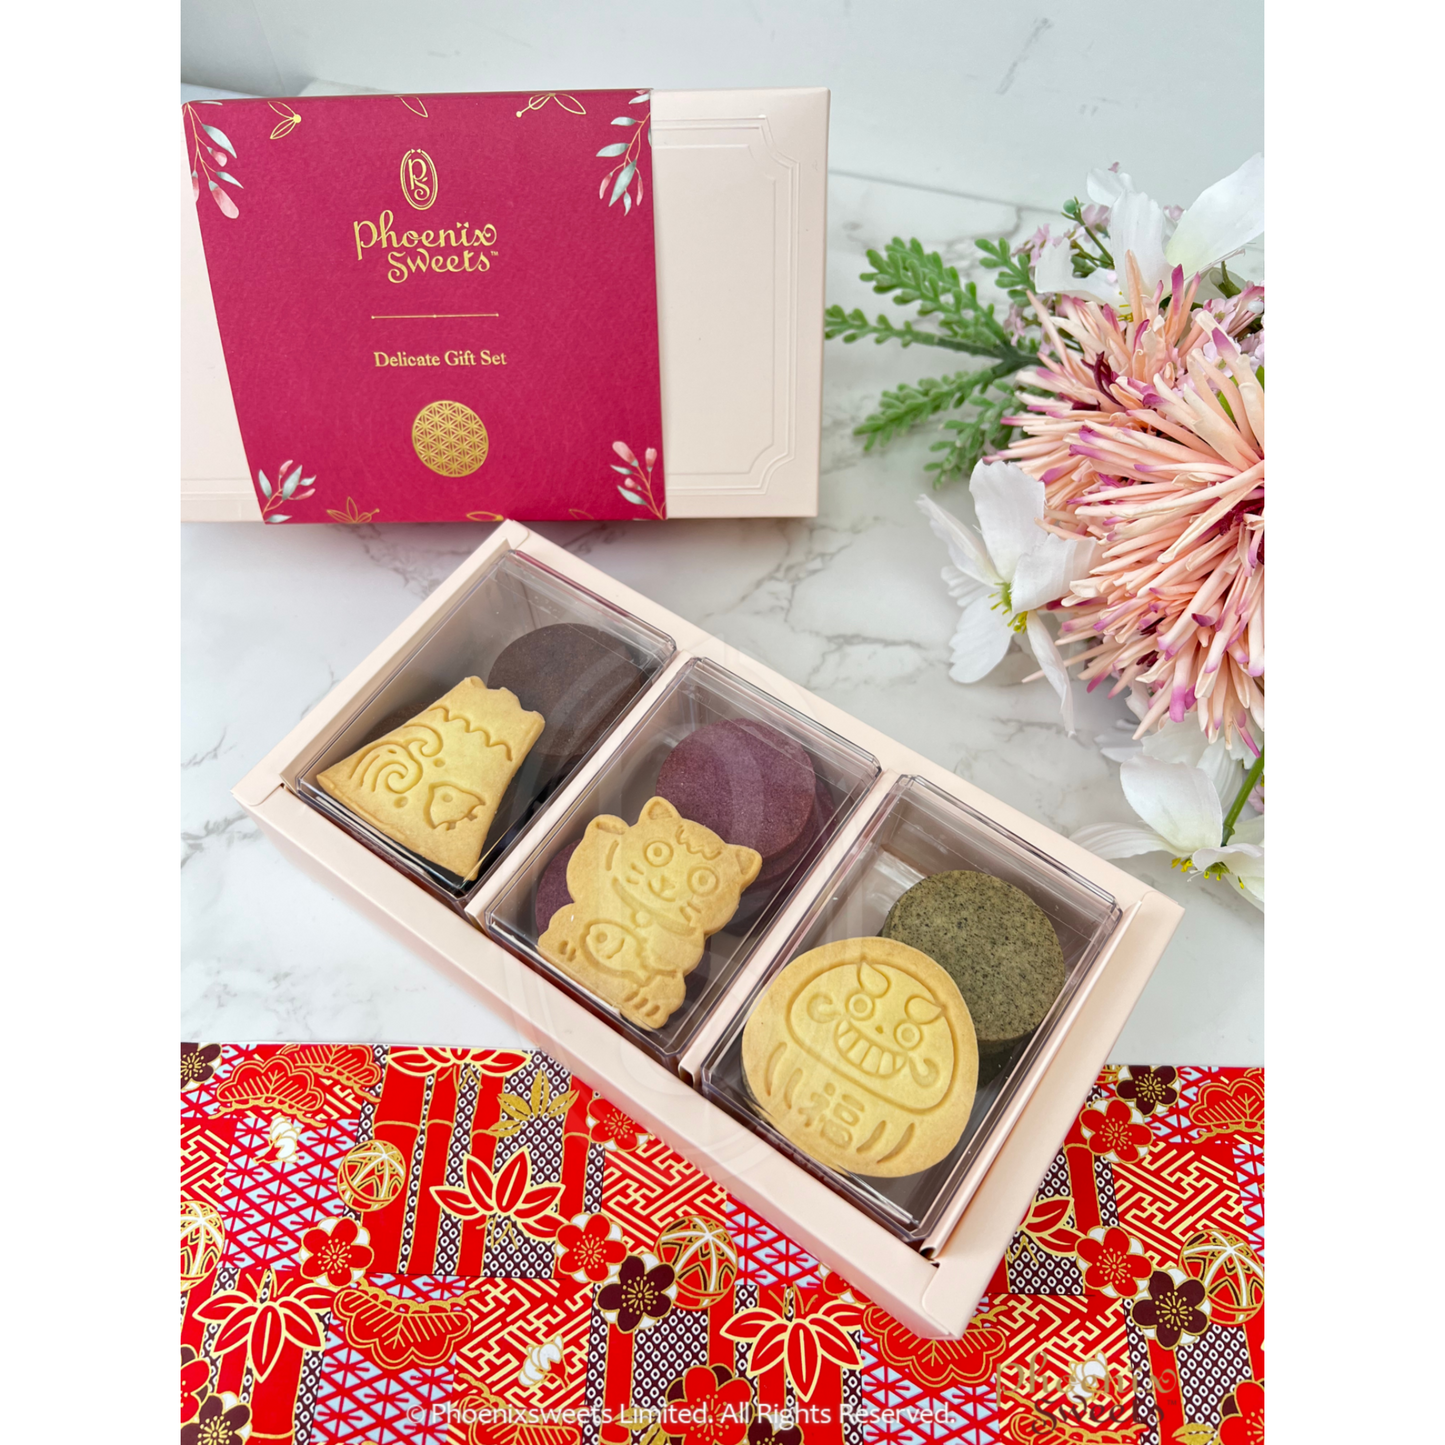 Selected Homemade Cookie (Box Set)